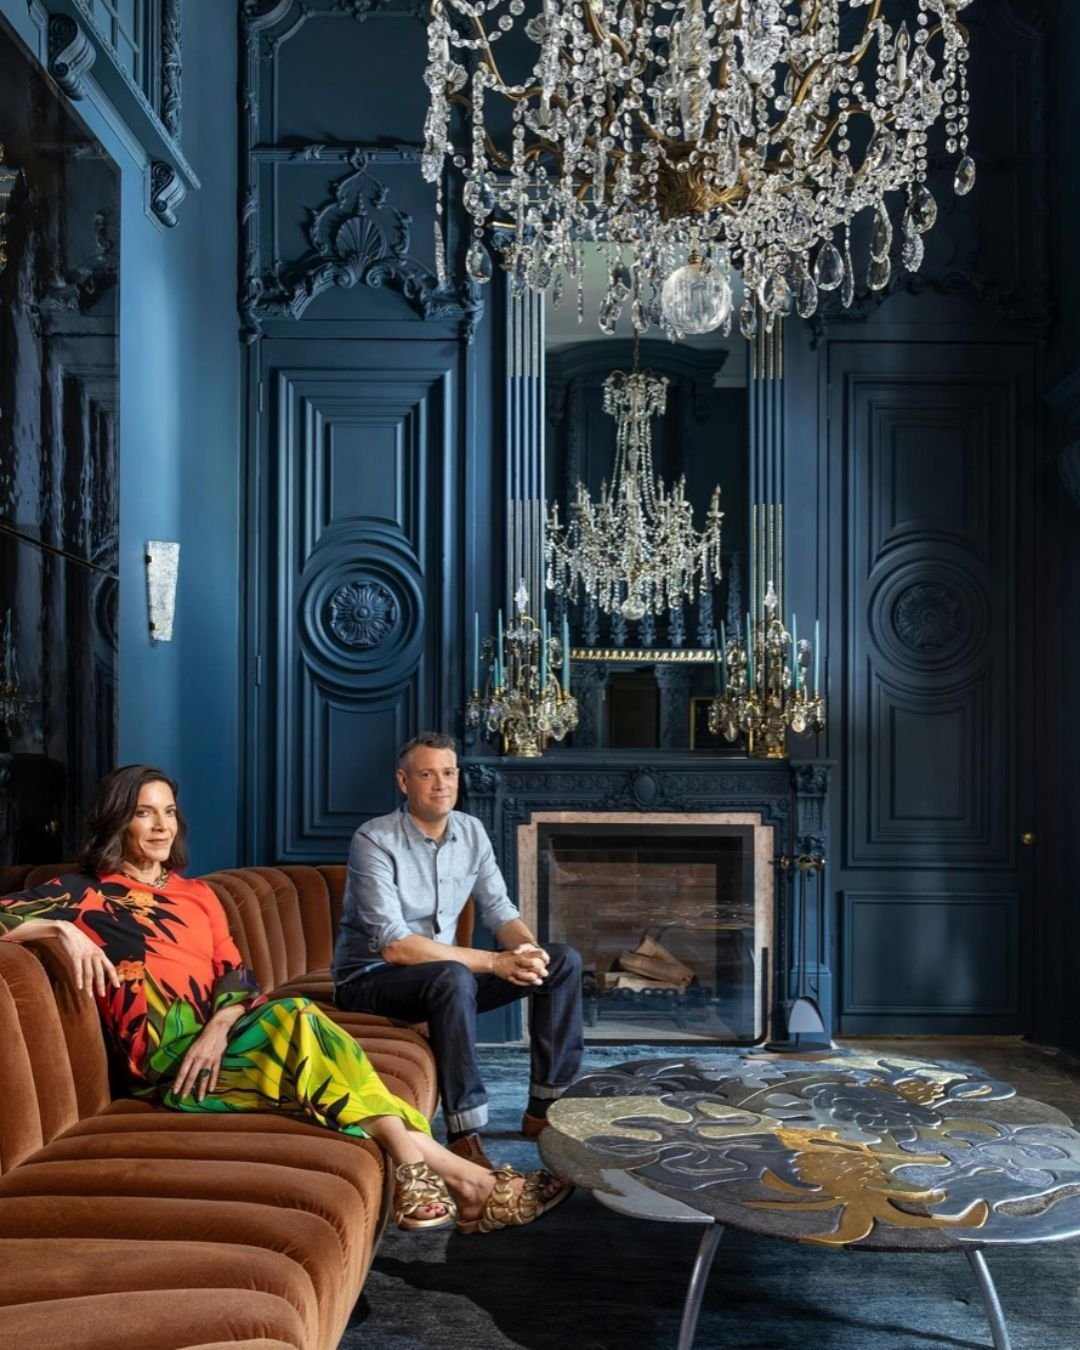 Speaking of chandeliers, I am obsessed with the way @young_projects paired layered moody blues with these glamorous fixtures. This whole vibe is all very on trend.

@young_projects @verso_works  #chandelier #homelighting #lighting #decorlighting #des